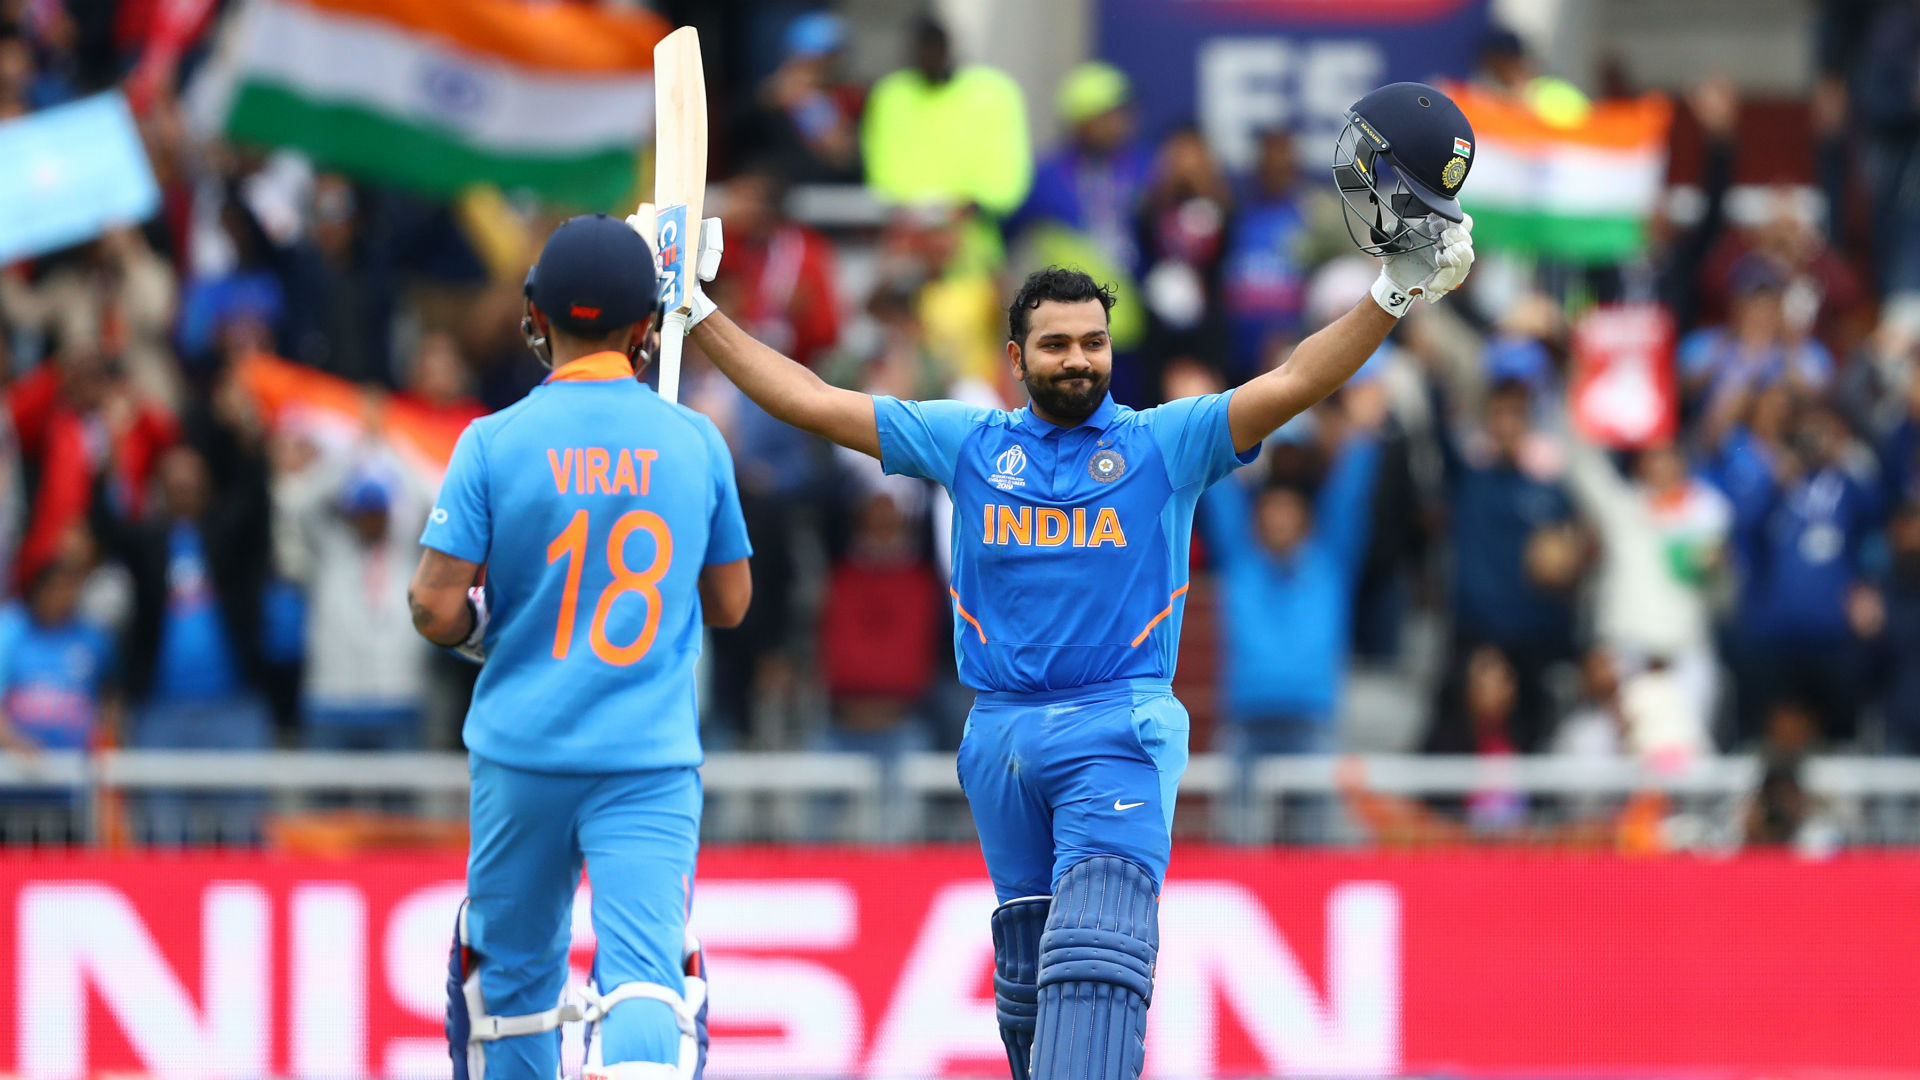 Relentless Rohit And Record-breaking Kohli Help India - Icc World Cup 2019 India Vs Pakistan - HD Wallpaper 